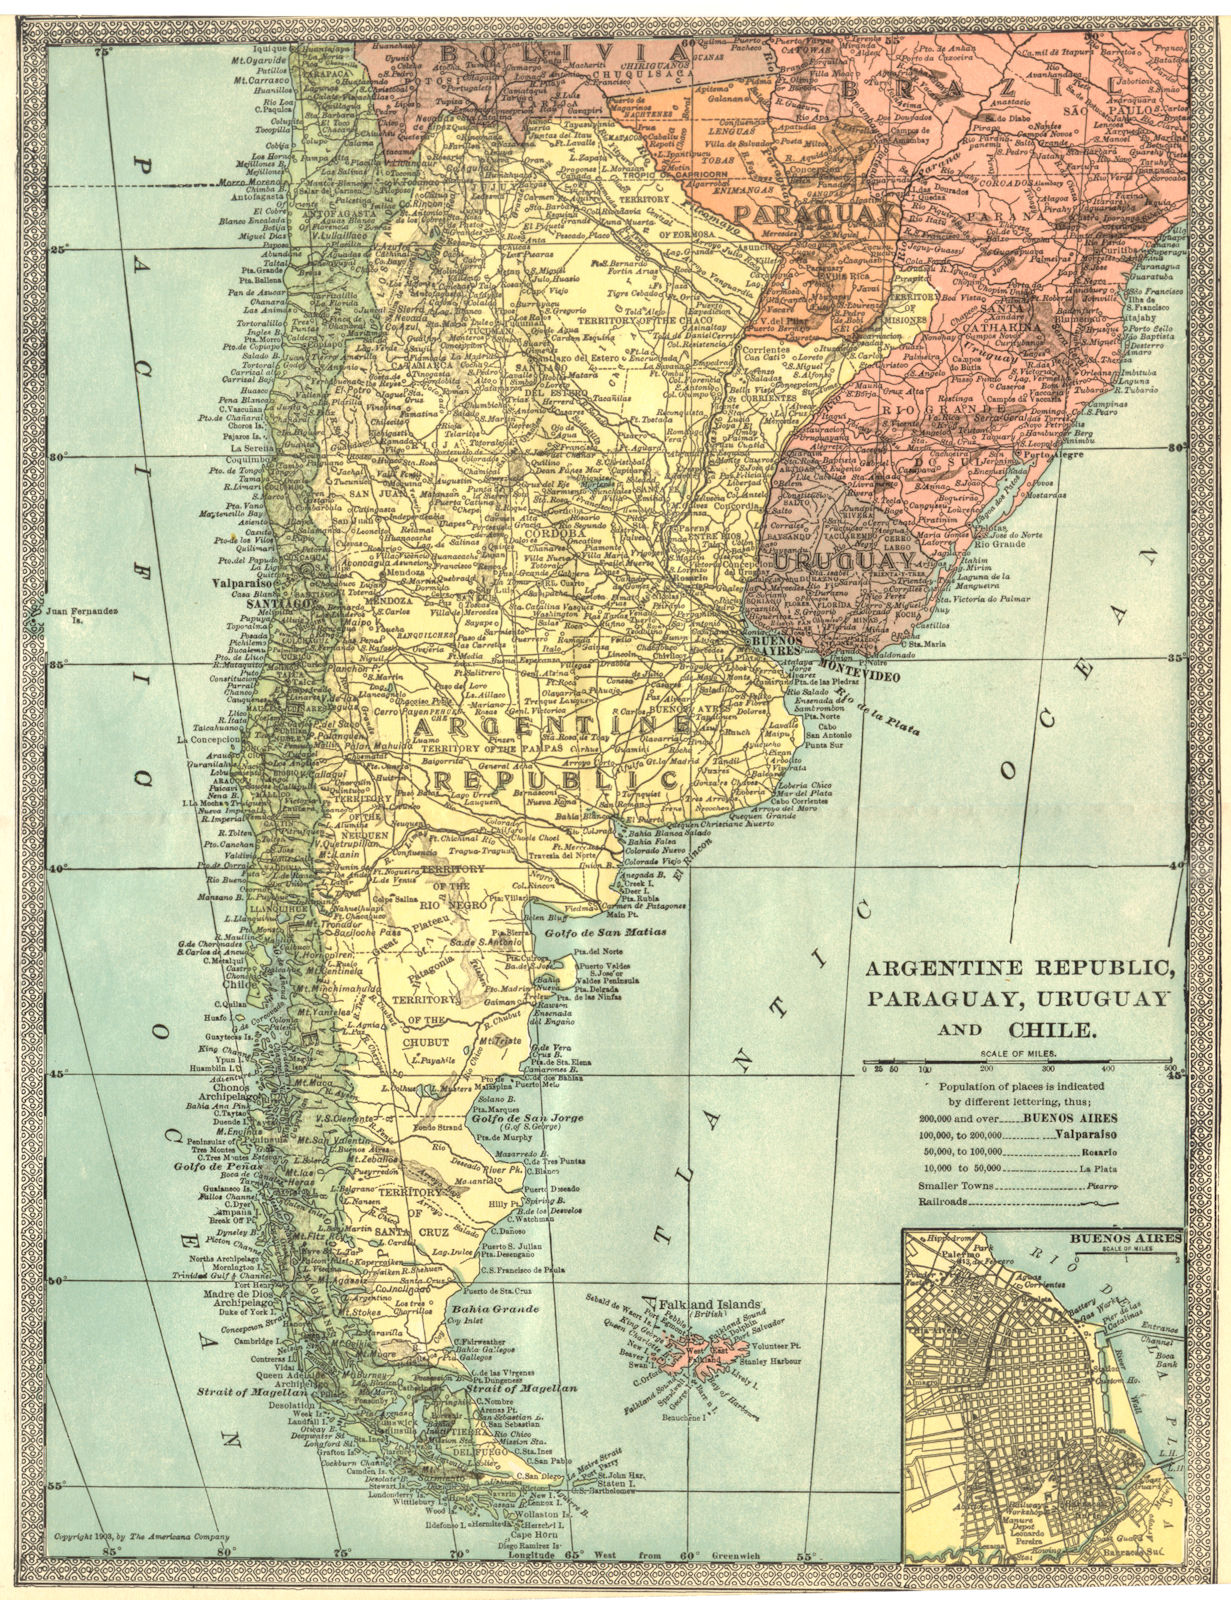 Associate Product ARGENTINE REPUBLIC. Argentina Paraguay Uruguay Chile. Buenos Aires 1907 map